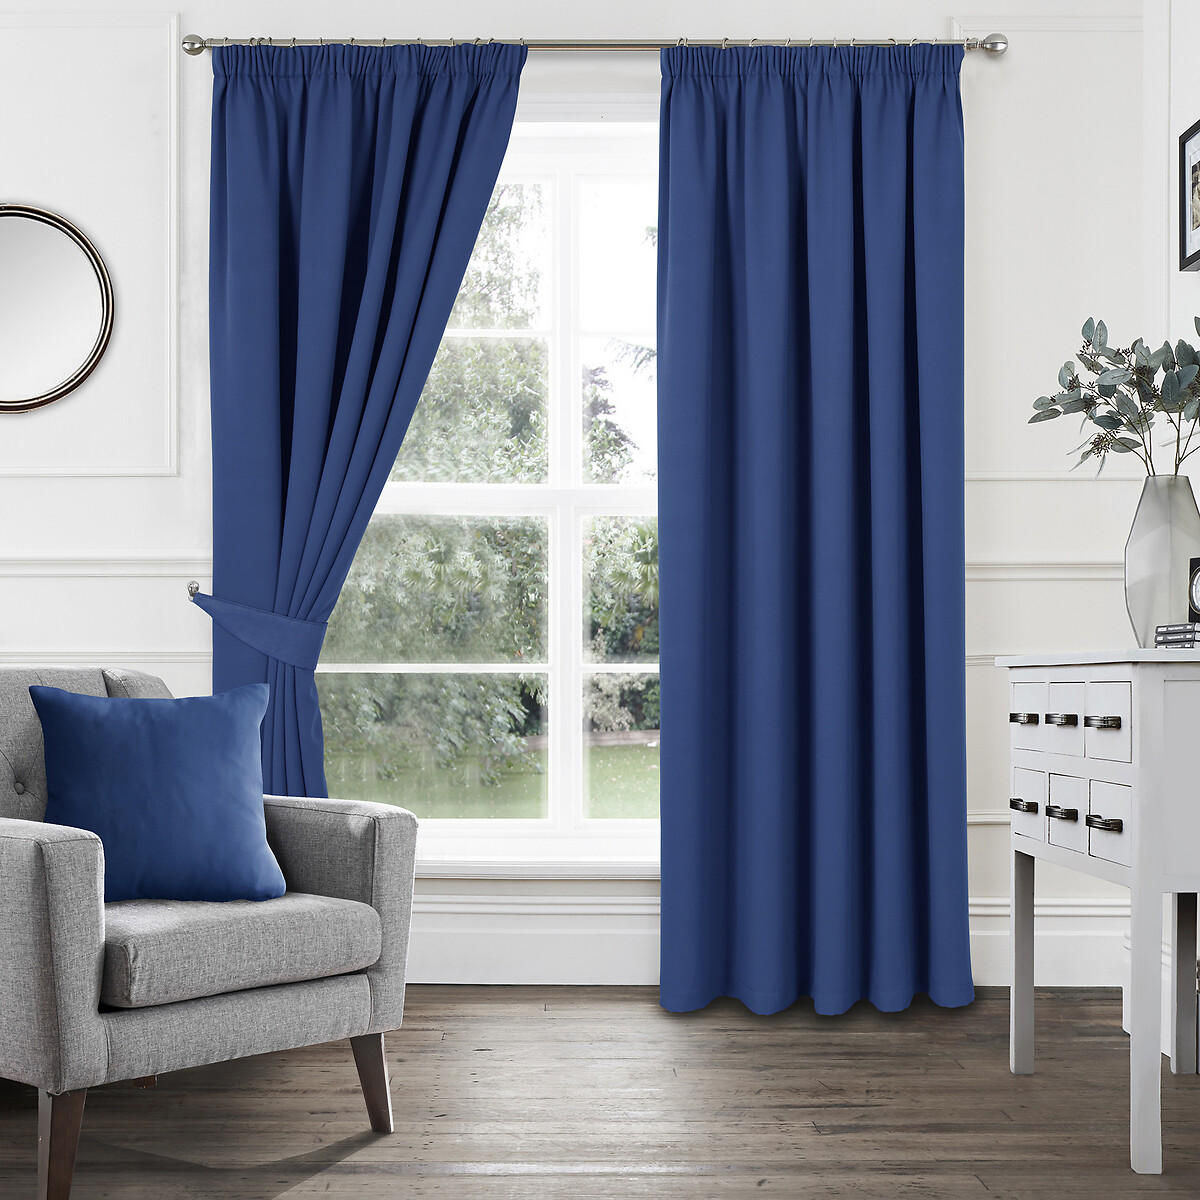 JACQUARD CHECK NAVY BLUE LINED PENCIL PLEAT CURTAINS DRAPES *9 SIZES* 